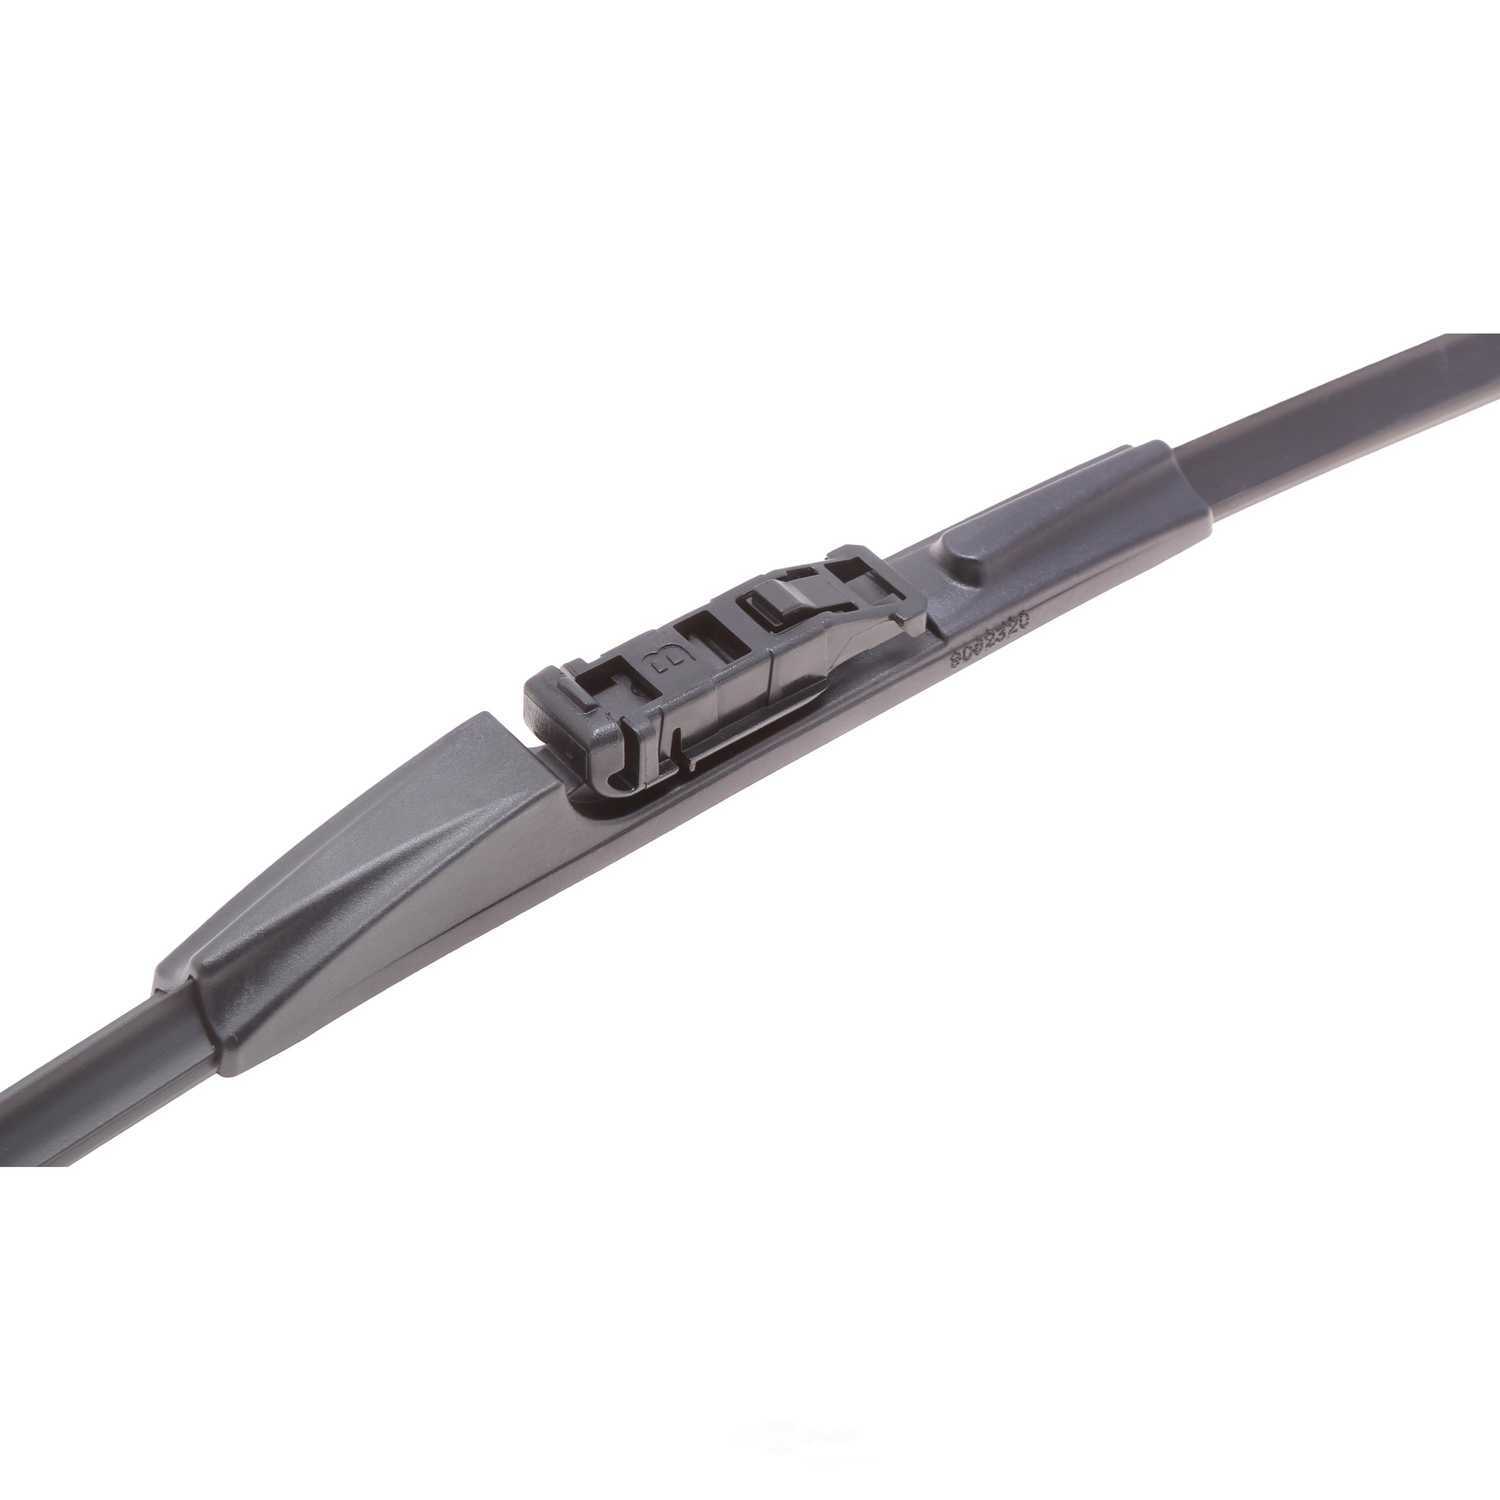 ACDELCO GOLD/PROFESSIONAL - Beam Wiper Blade - DCC 8-992213